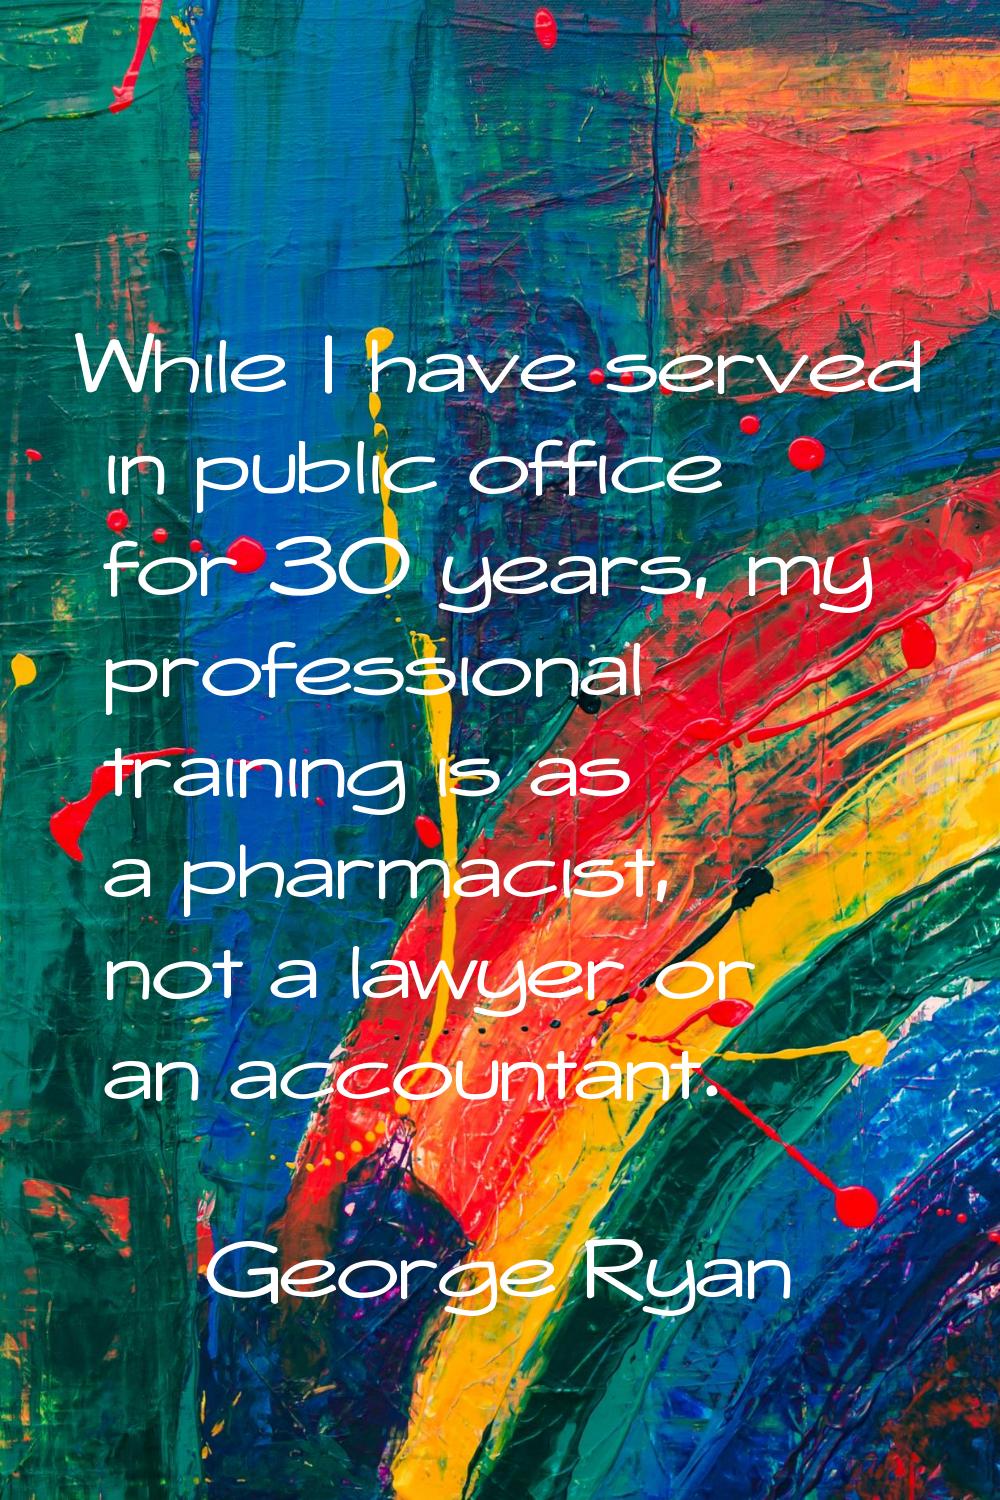 While I have served in public office for 30 years, my professional training is as a pharmacist, not